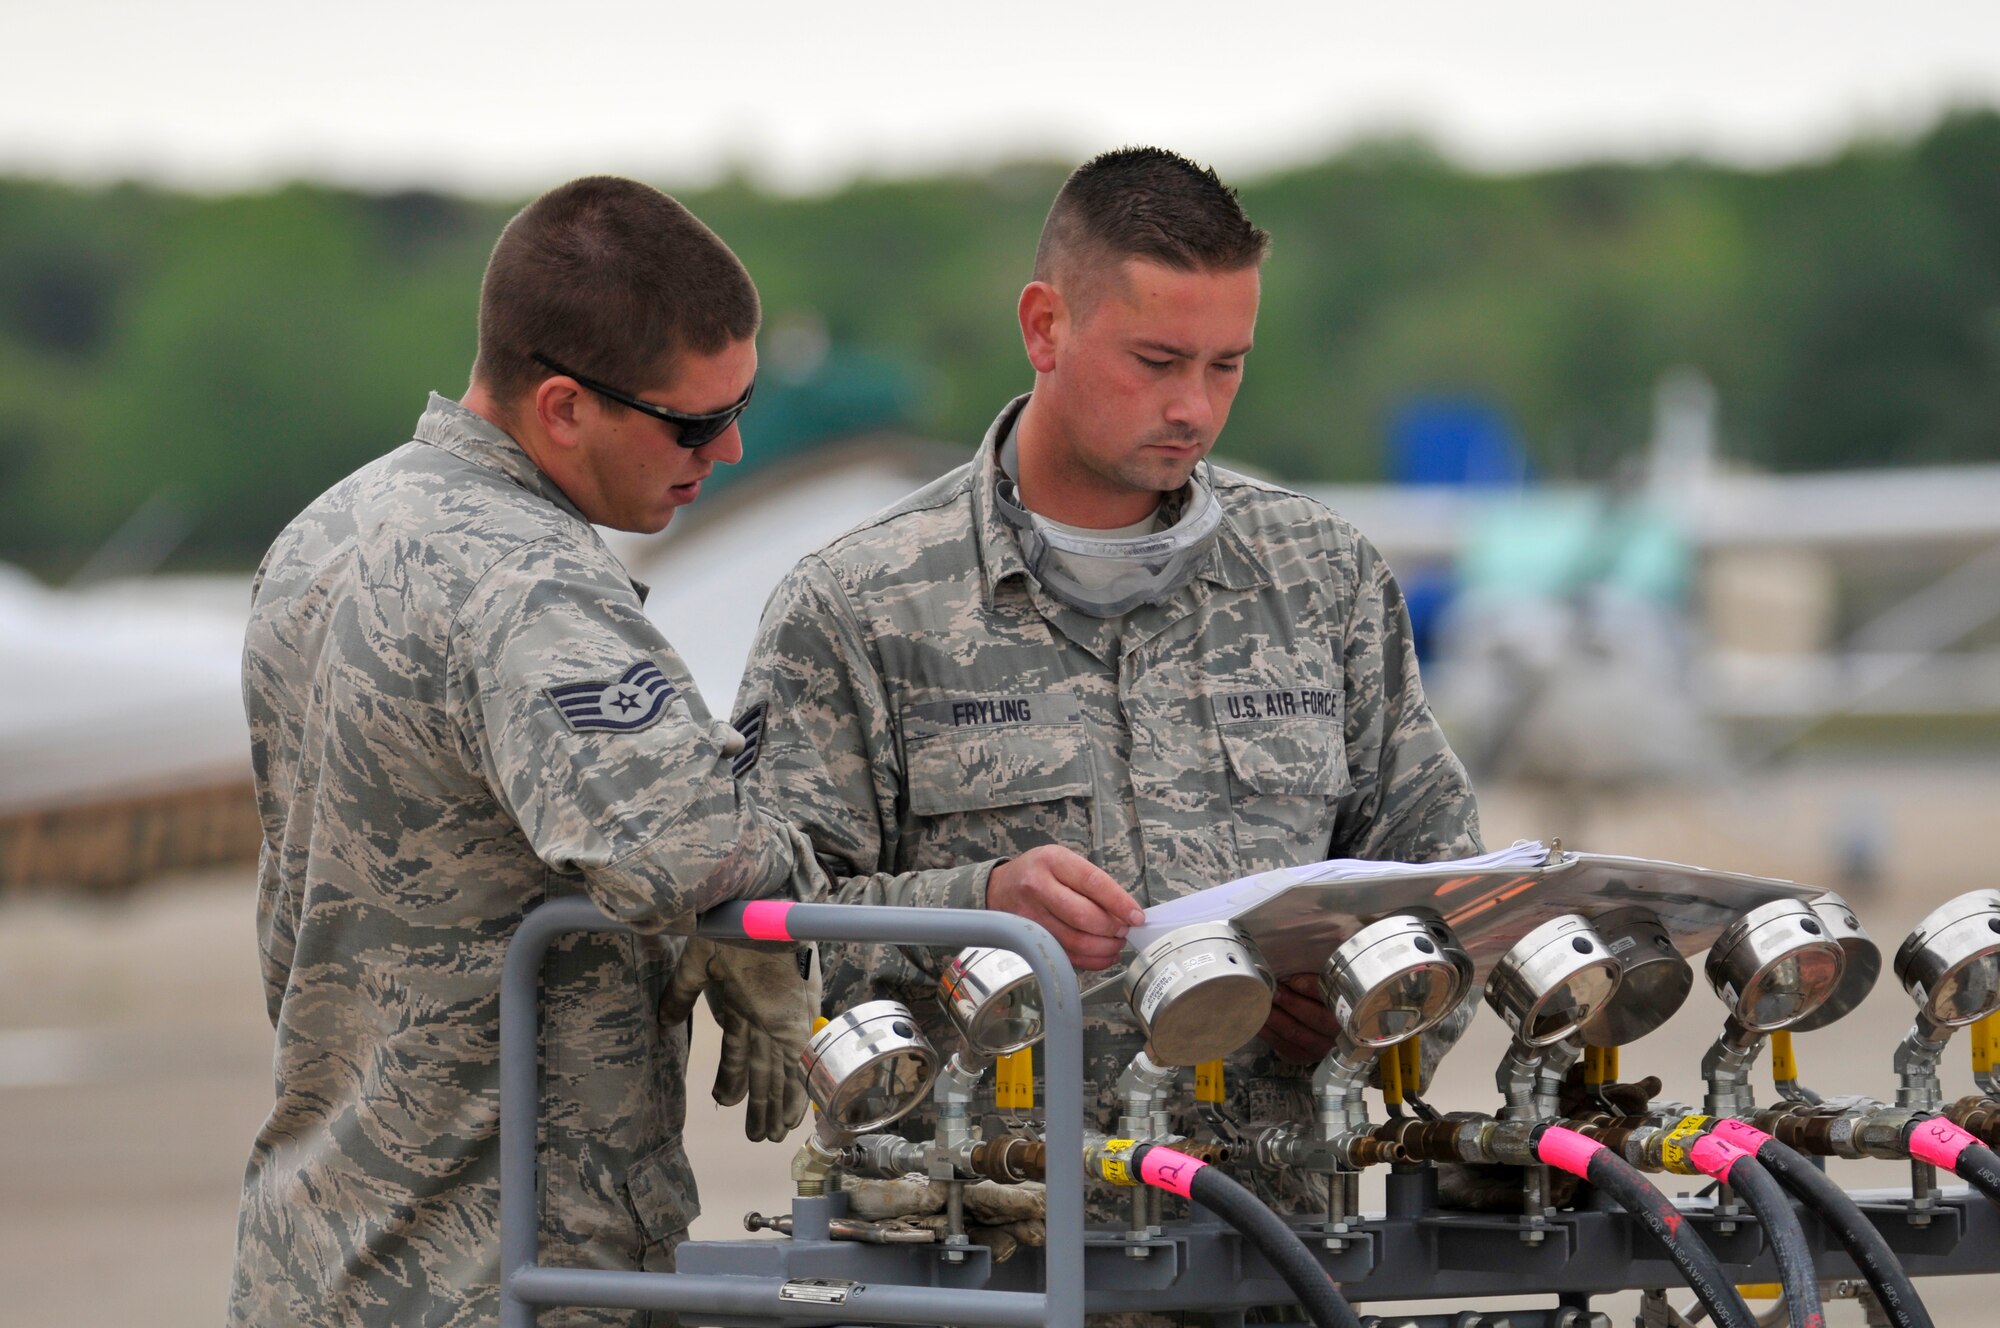 A picture of U.S. Air Force Staff Sgts. Edward Fryling and James Dzierwinski reviewing a training guide on manifold pressure operations of a pneumatic a lifting bag assembly.